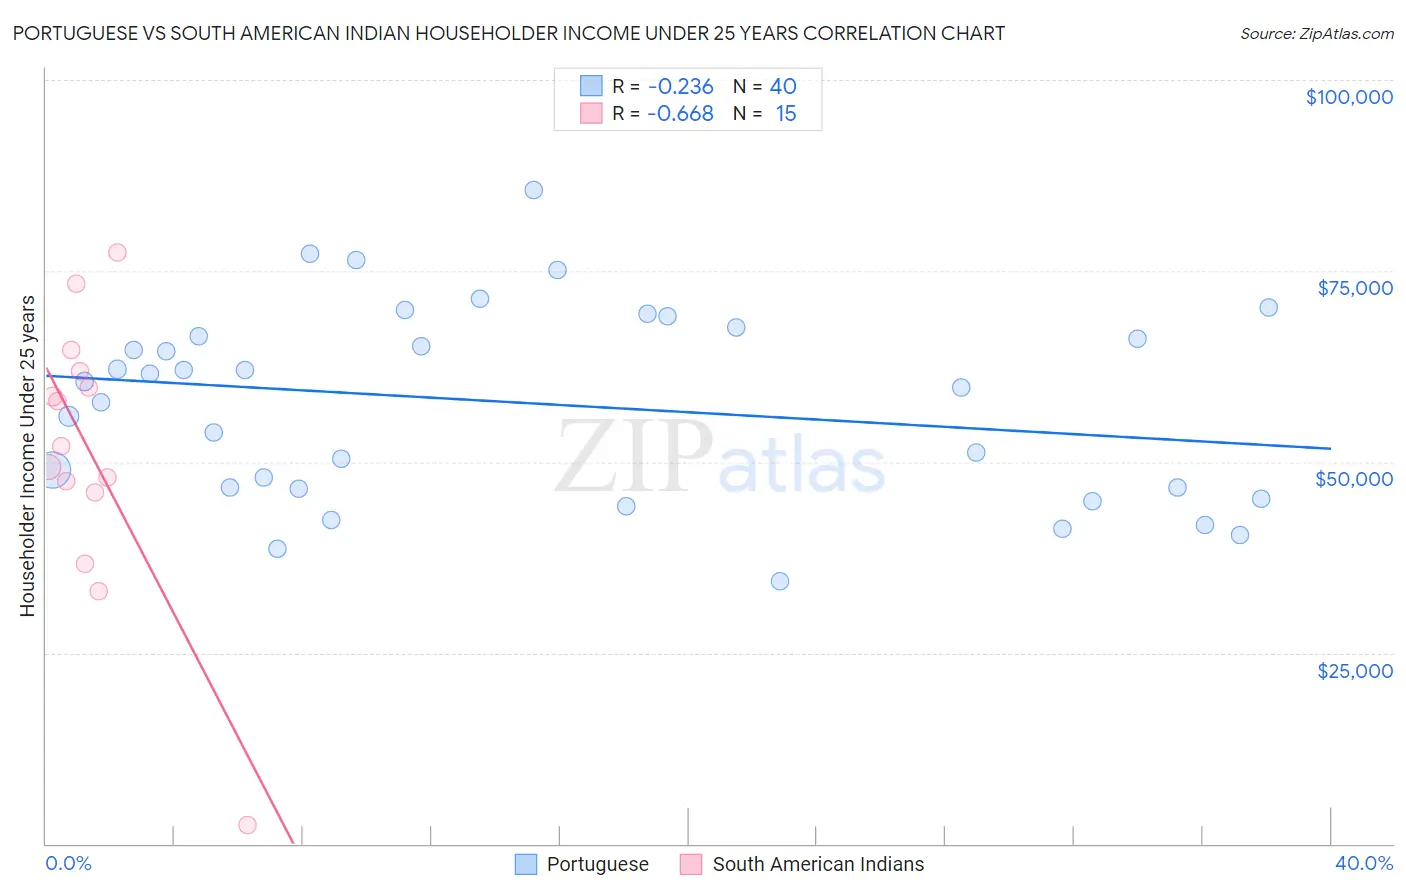 Portuguese vs South American Indian Householder Income Under 25 years